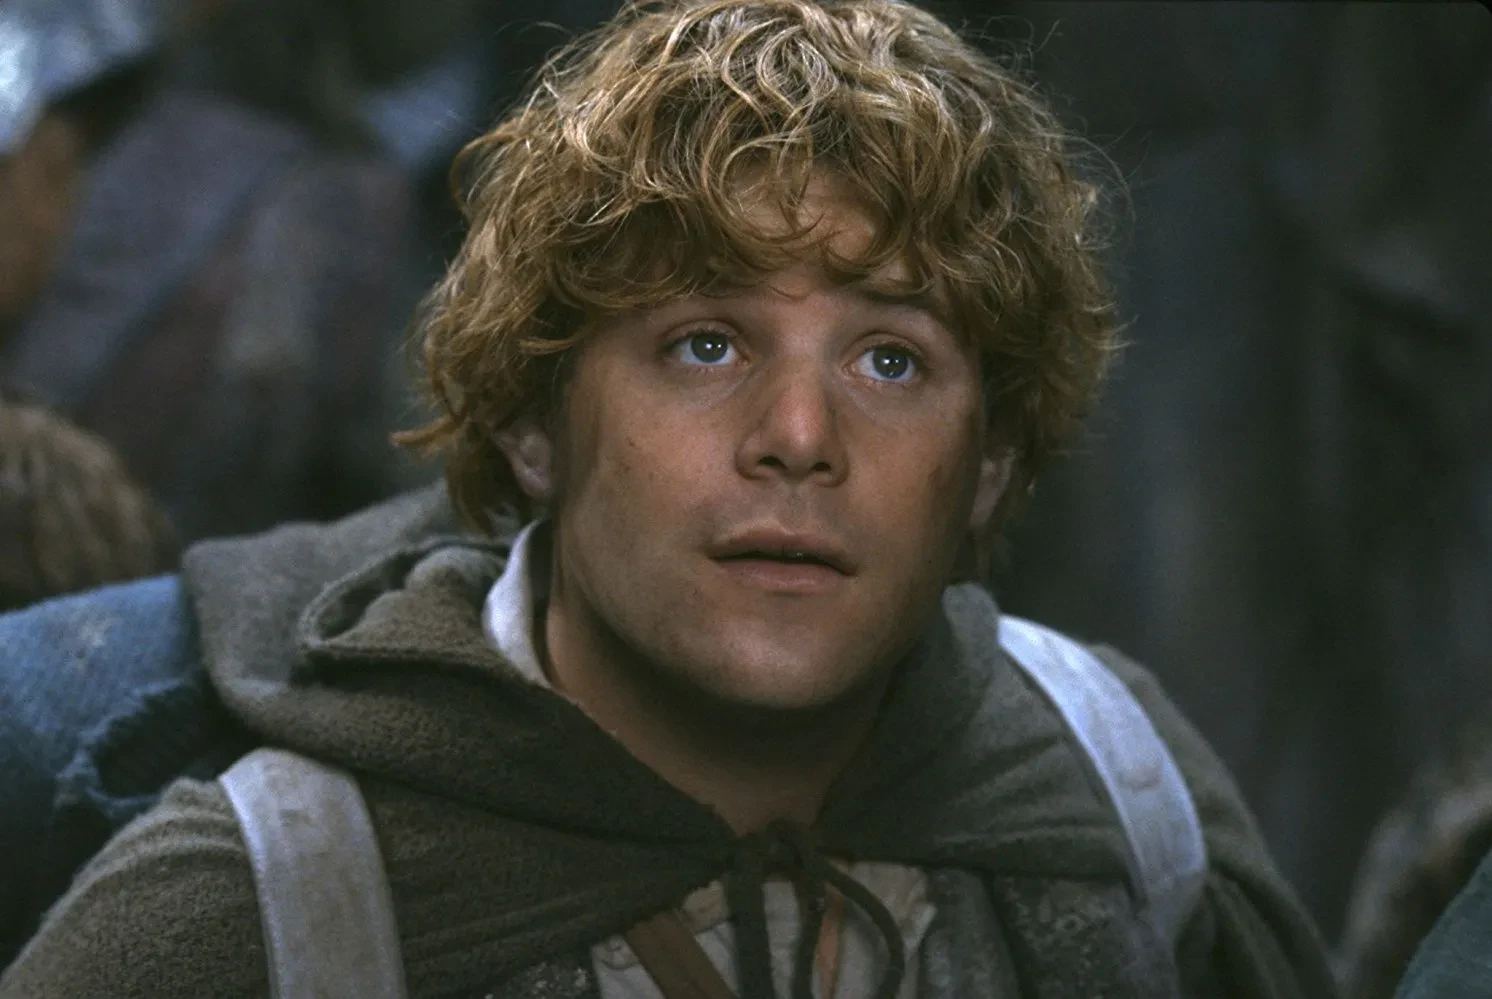 Sean Astin in the Lord of the Rings franchise